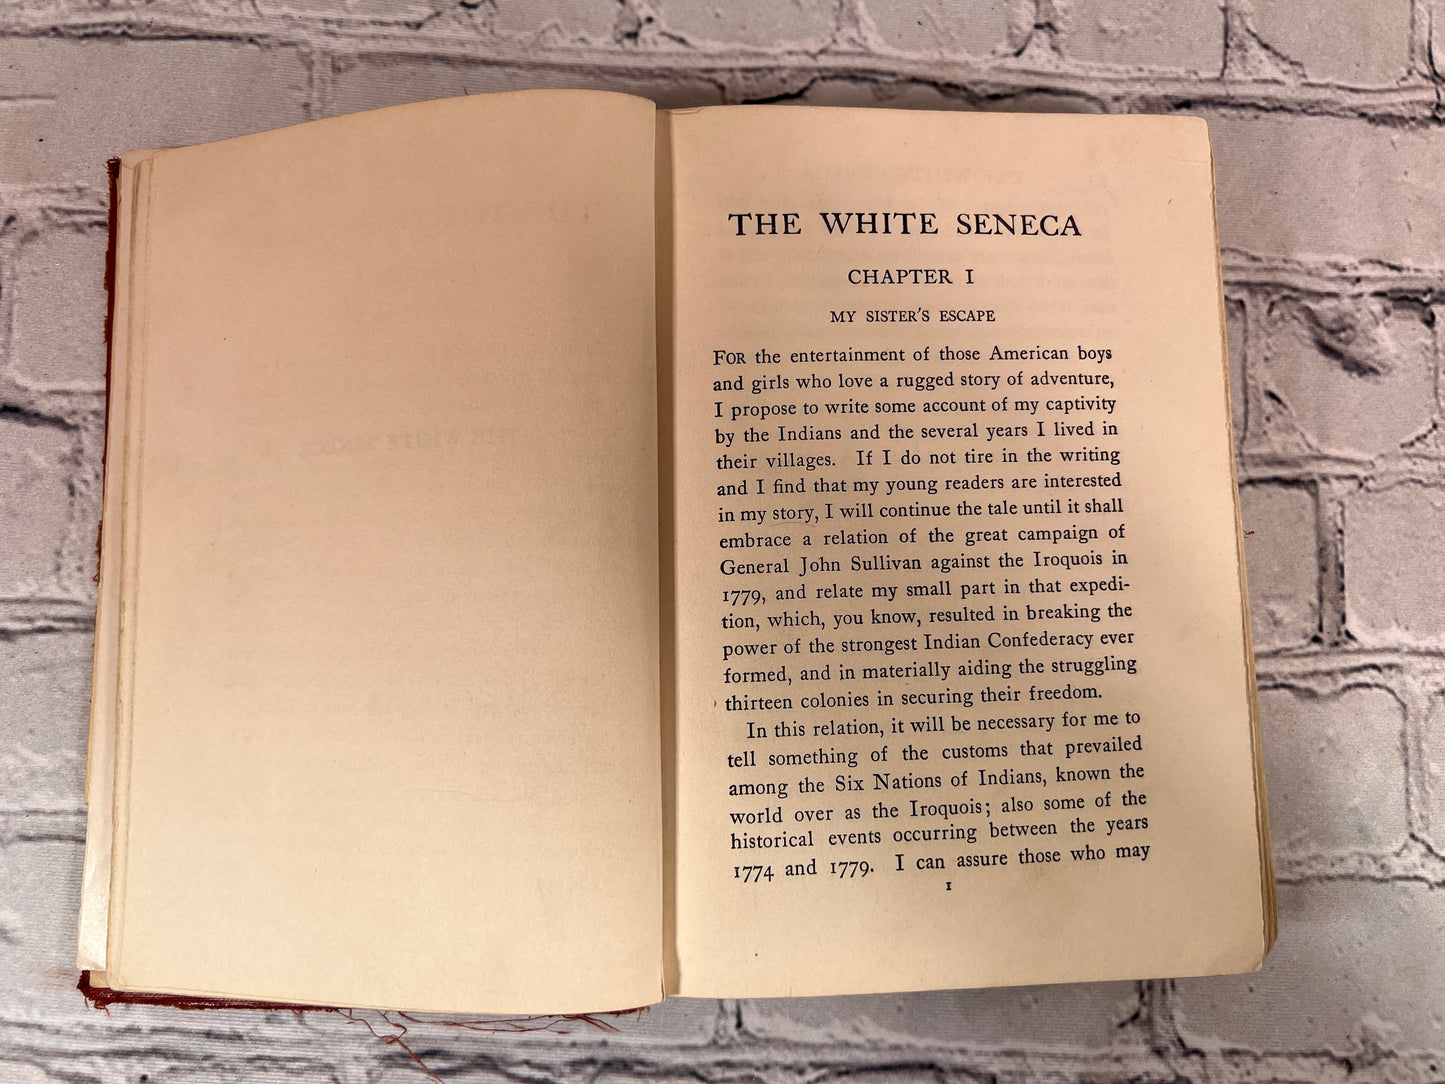 The White Seneca by William W. Canfield [1936 · 9th Edition]